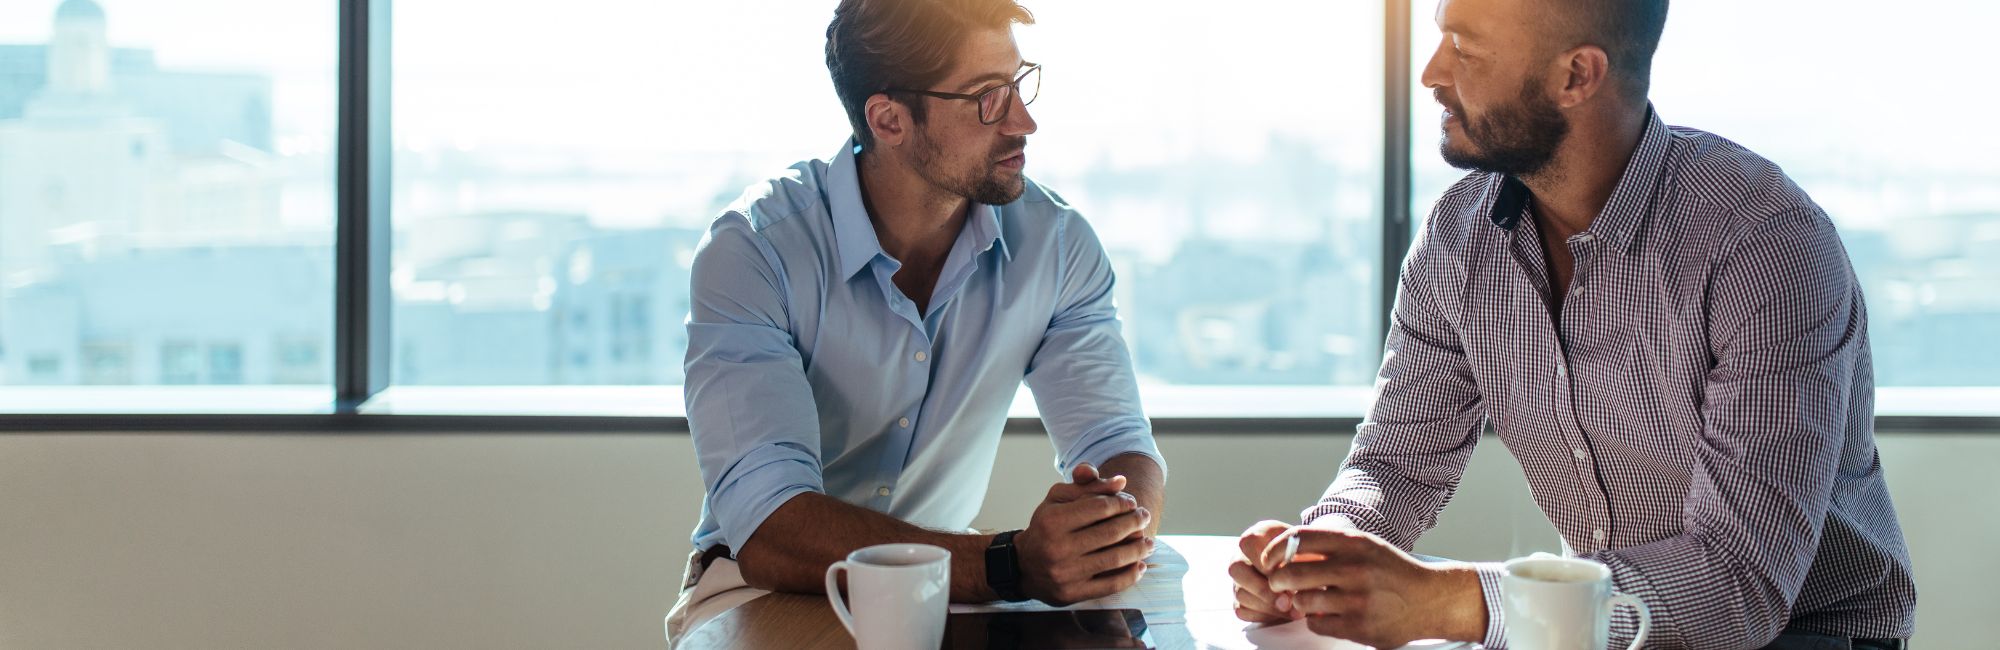 Prioritising Authentic Connections: Why Face-to-Face Meetings Matter